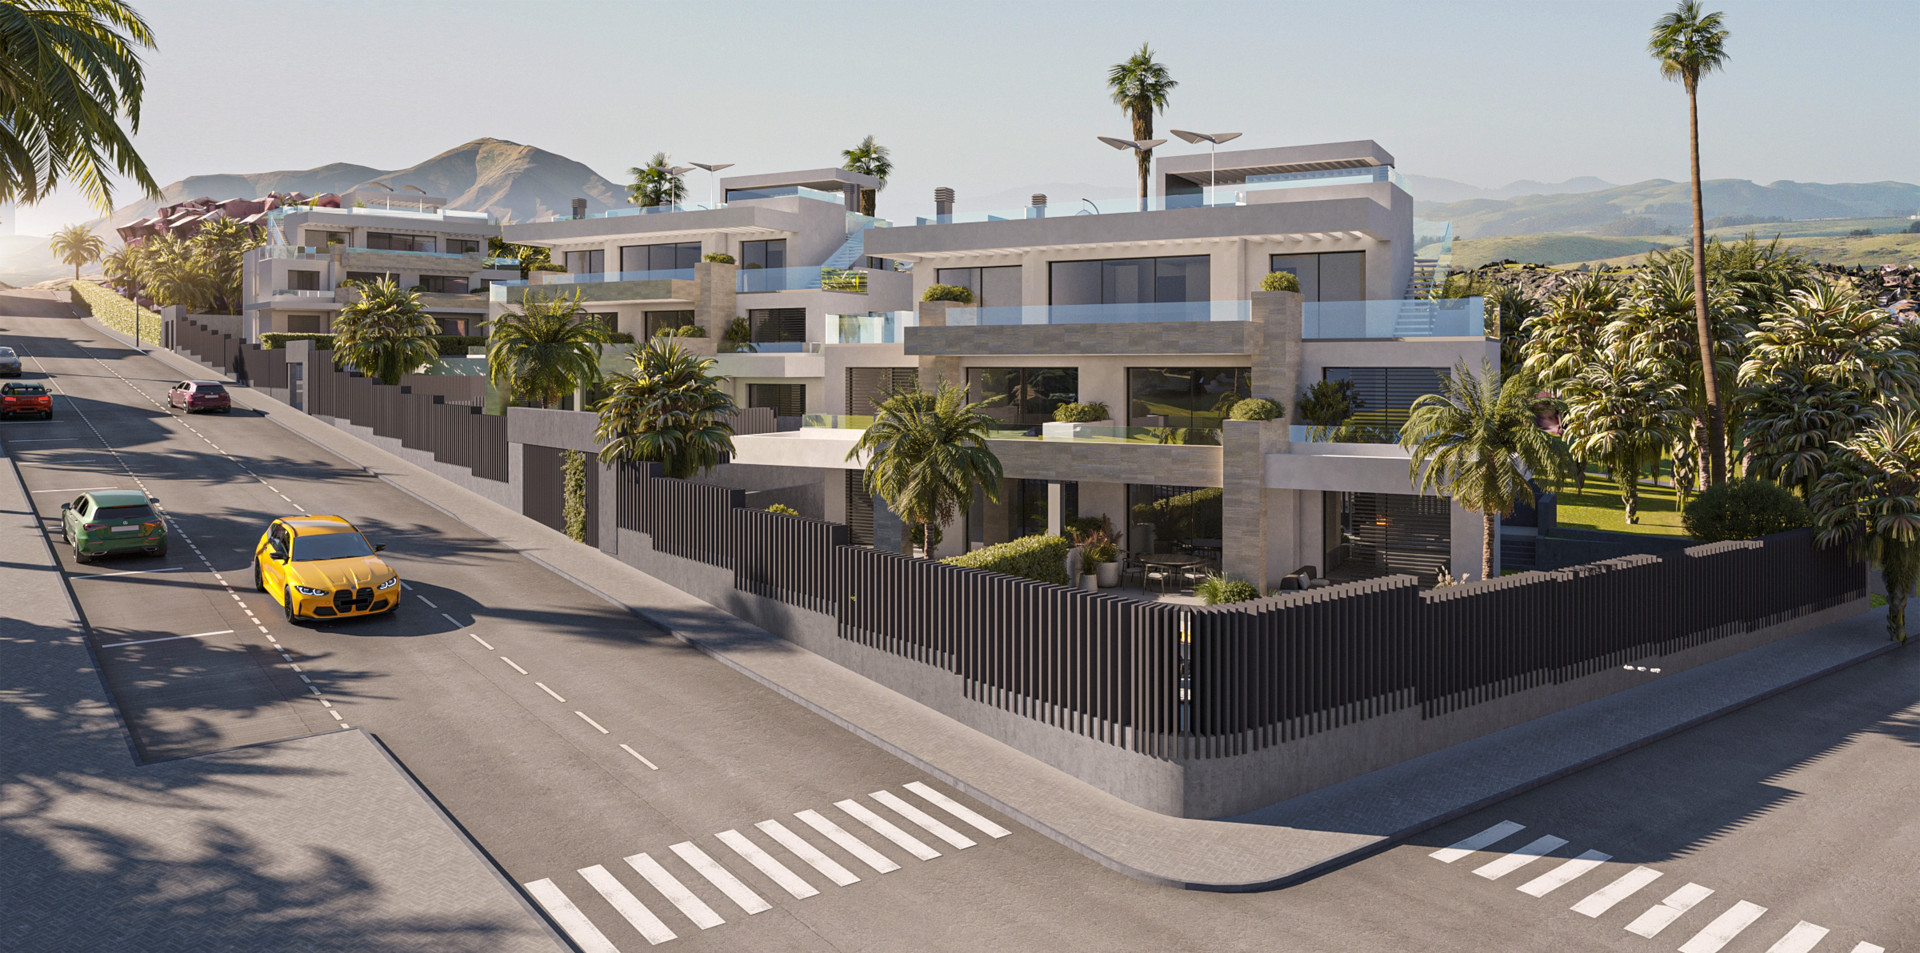 New contemporary off plan boutique complex of apartments for sale in Estepona - Buenas Noches